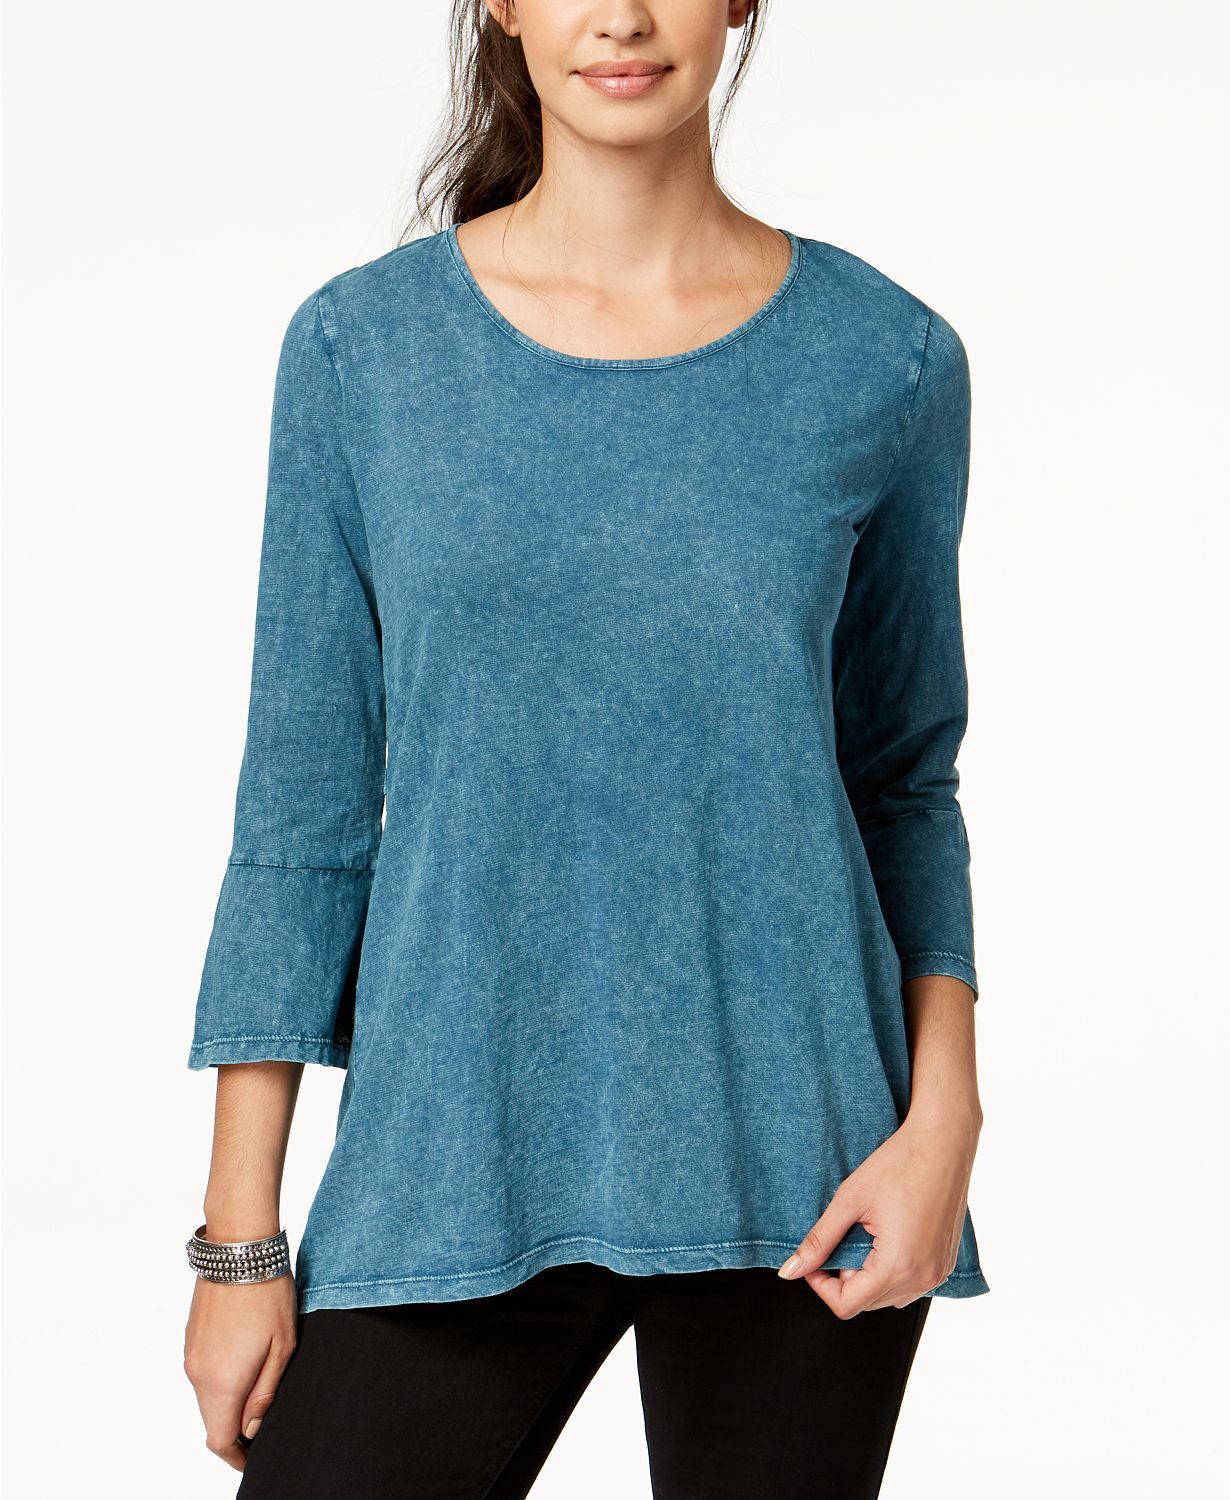 Style & Co. Womens Blue Hi-Low 3/4 Sleeve Tunic Top Shirt Petites PS